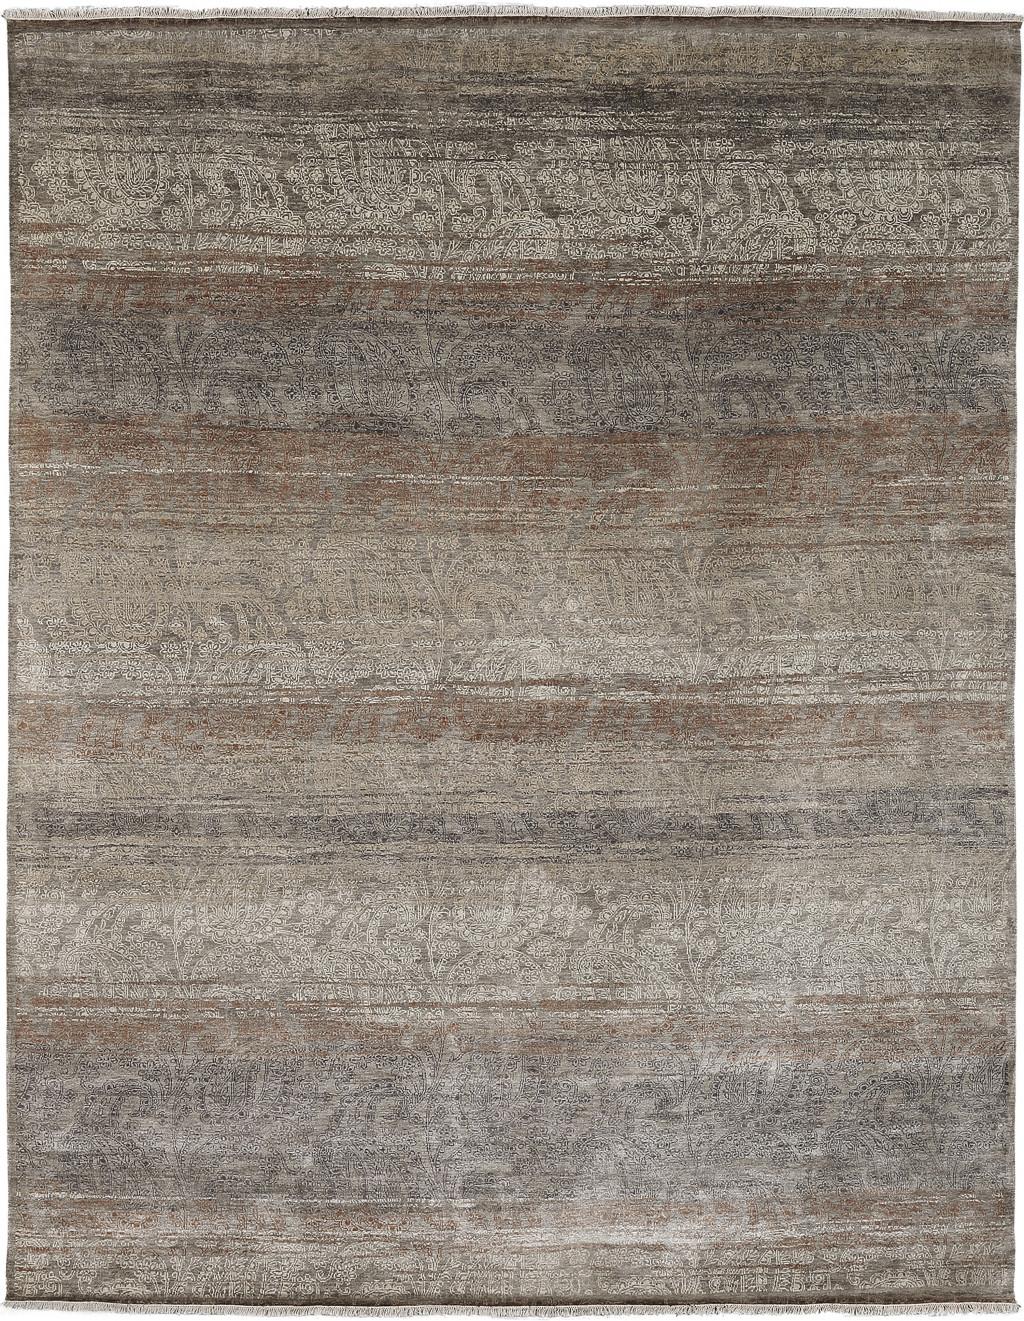 8' X 10' Tan Gold And Gray Paisley Hand Knotted Distressed Area Rug With Fringe Default Title